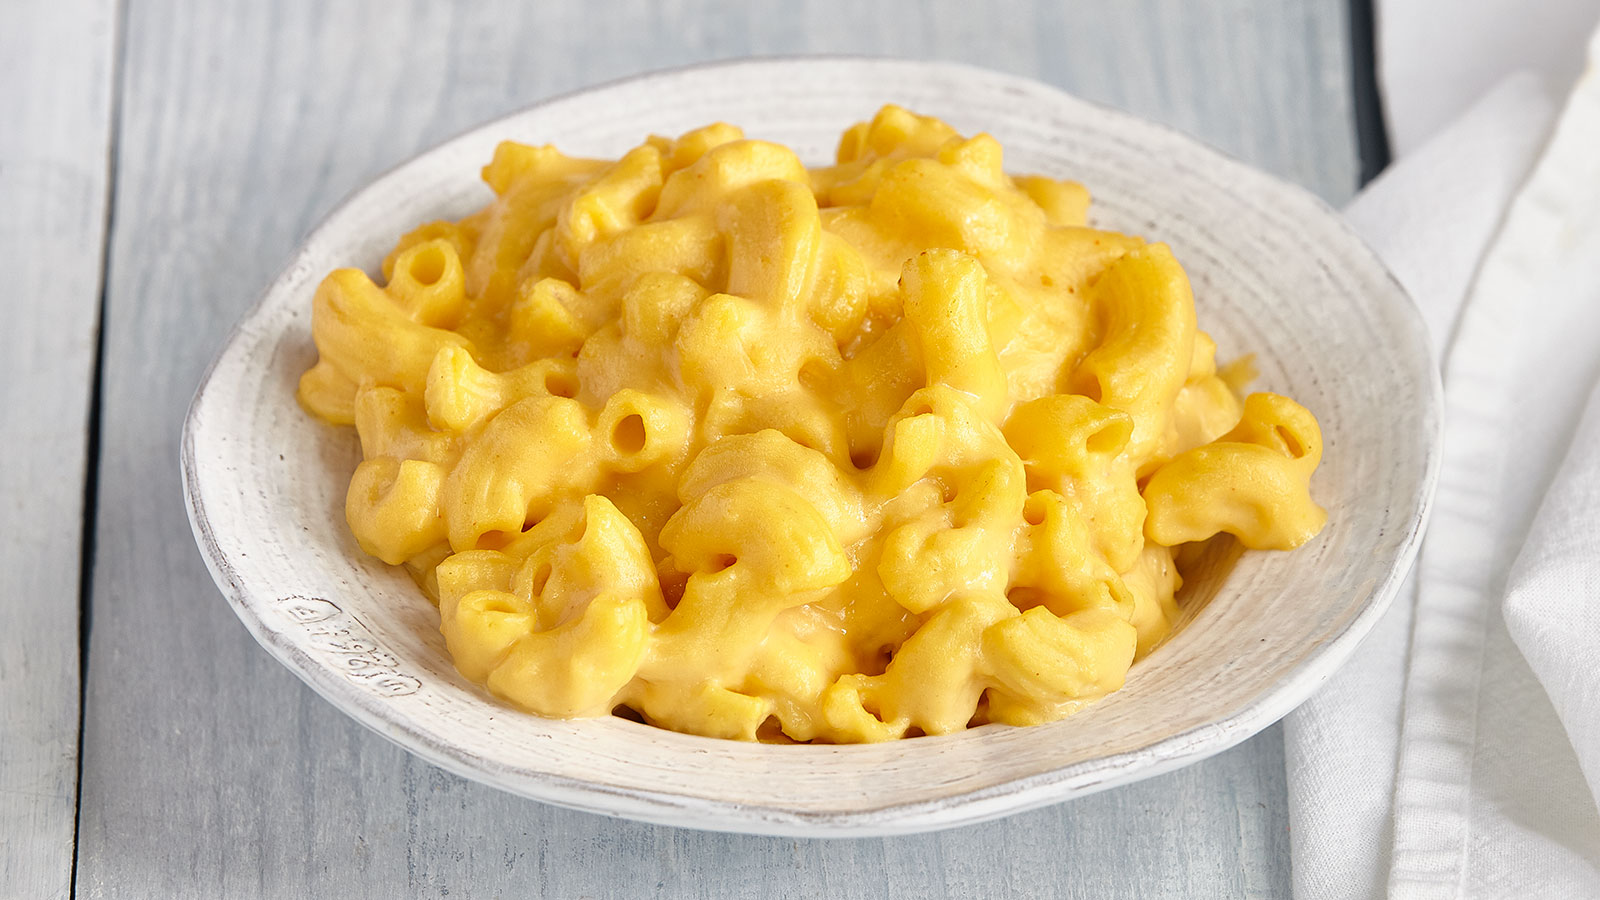 Eat at an Endless Buffet & We'll Guess Your Age & Gender Quiz Macaroni and cheese